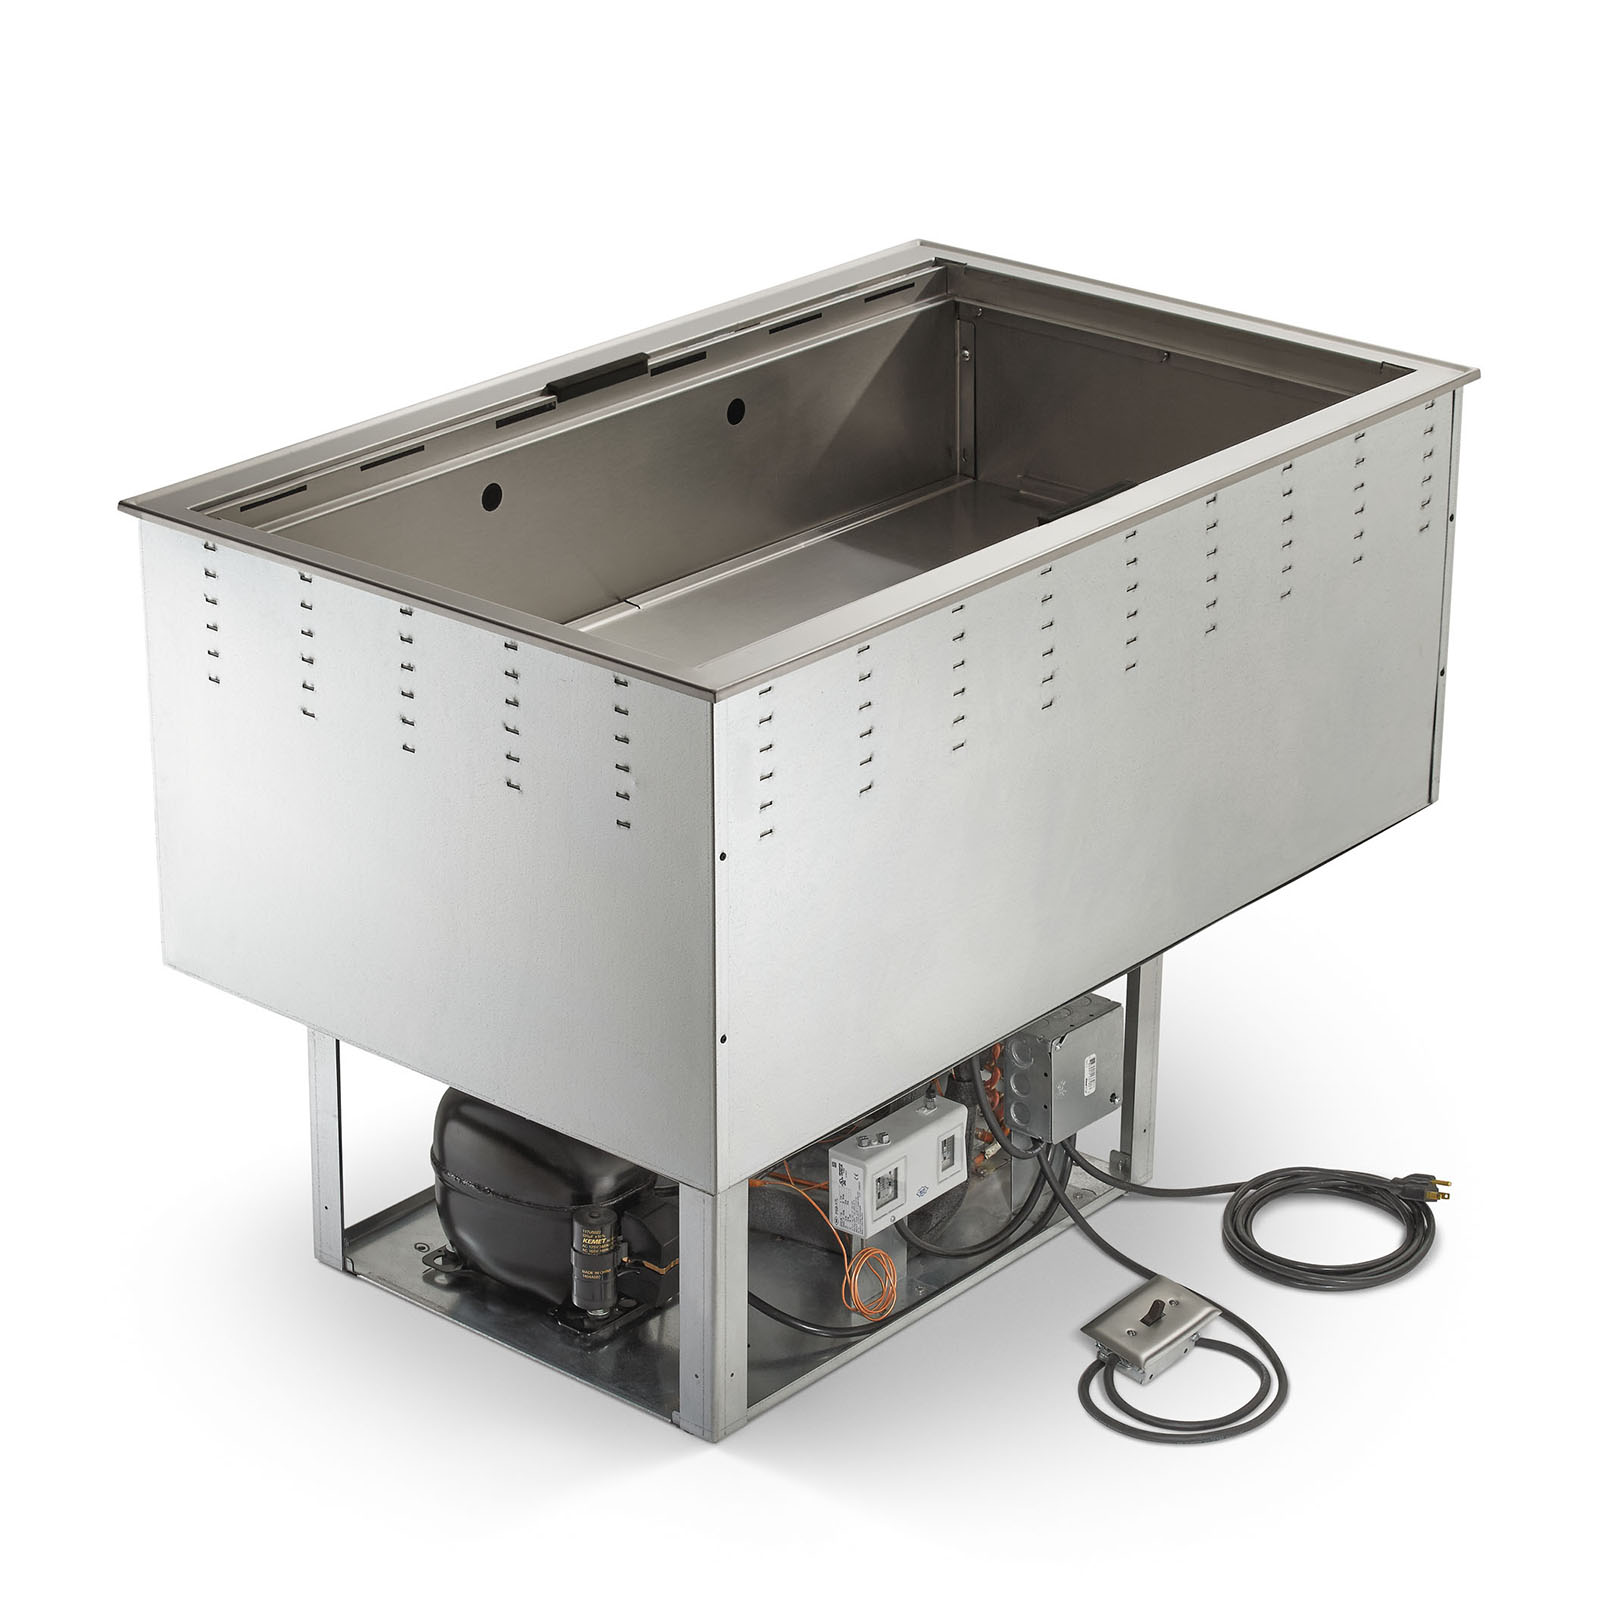 Vollrath FAC-3 Cold Food Well Unit, Drop-In, Refrigerated